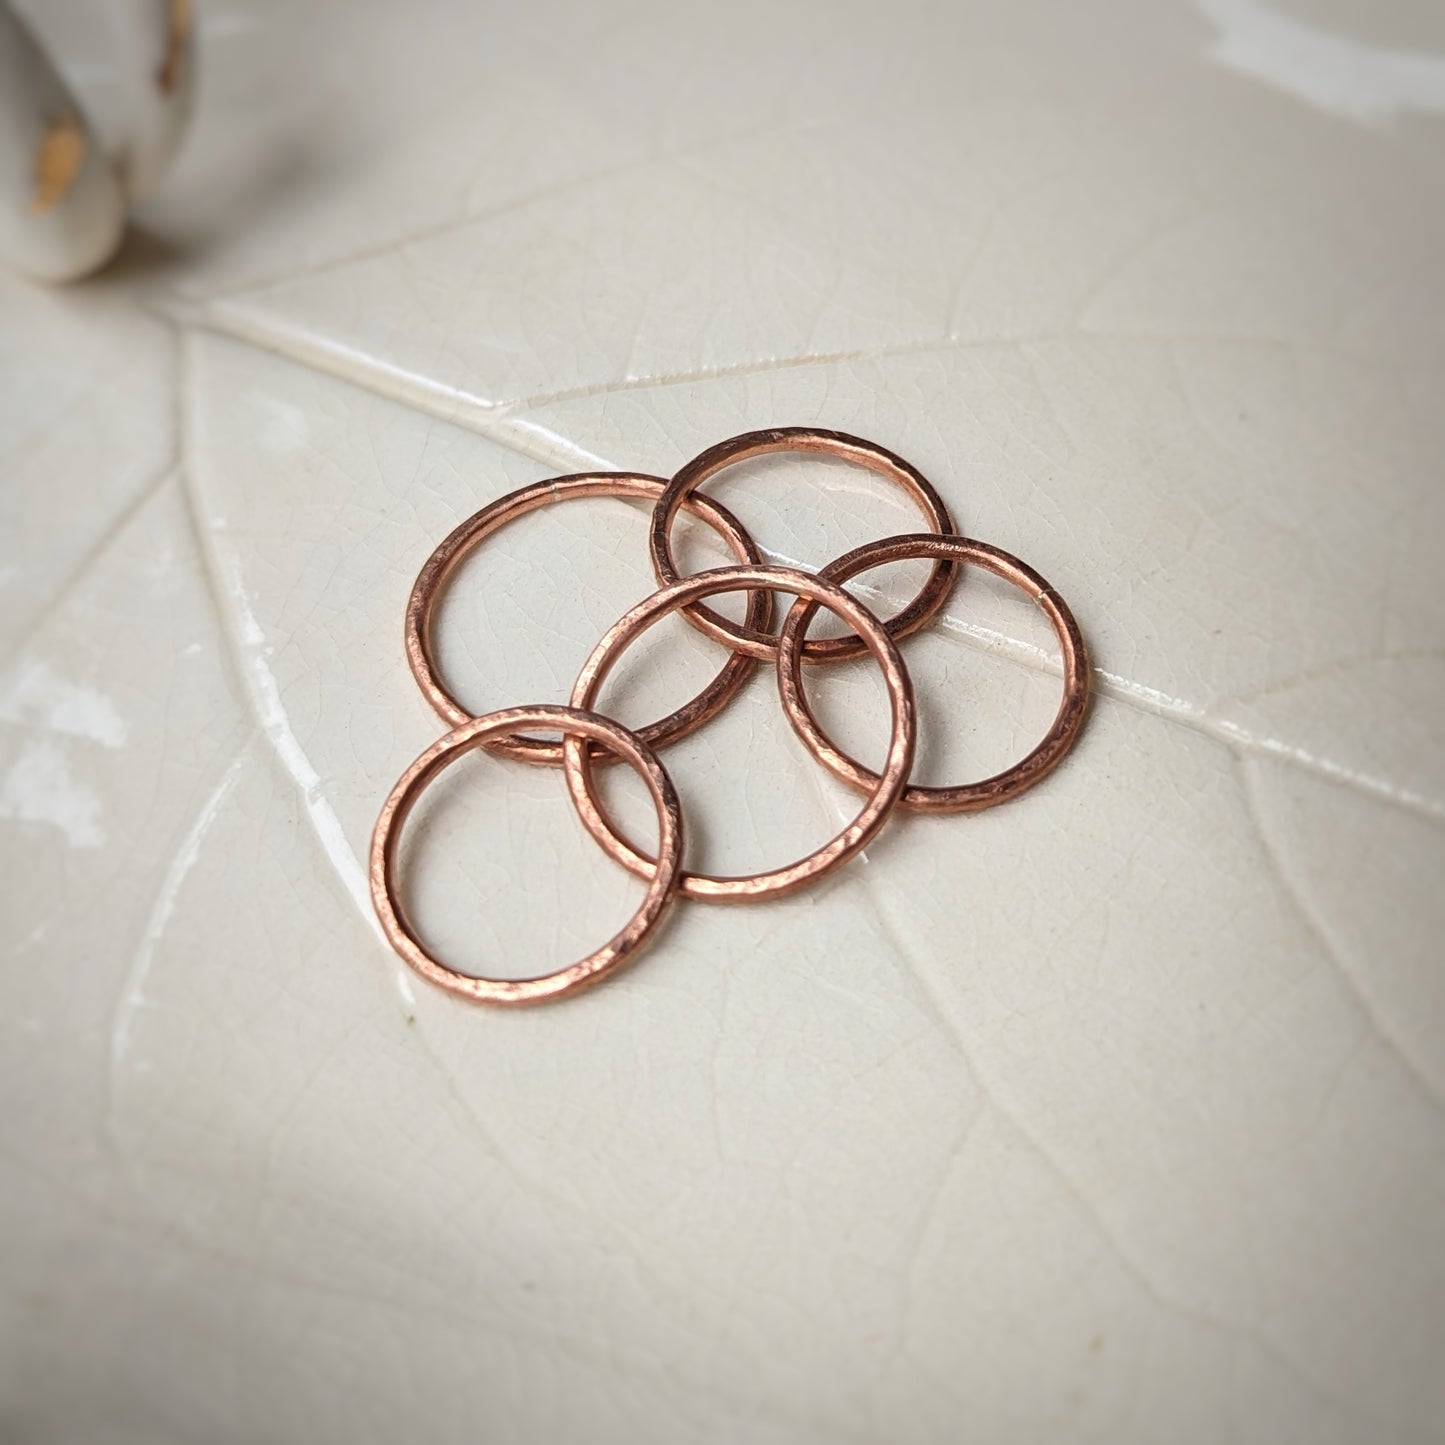 A collection of hammer texture pink copper rings sit scattered on a leaf imprint tray.